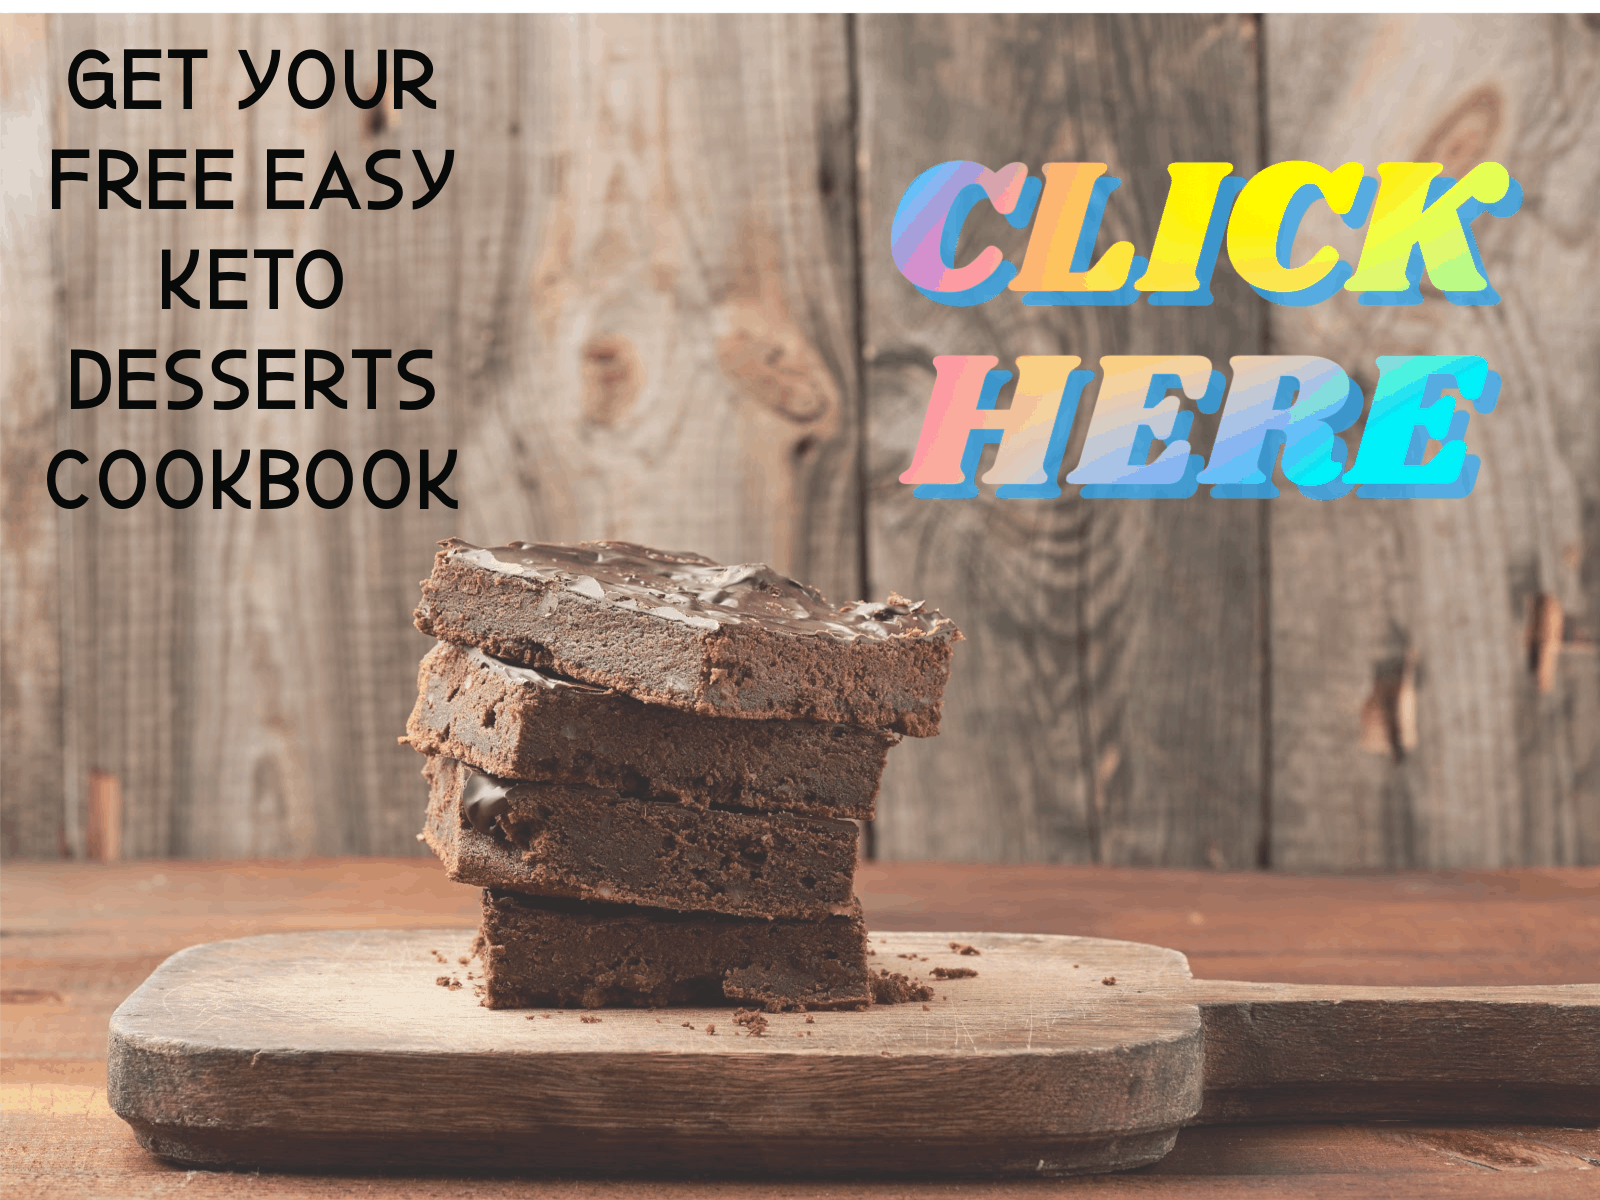 Four keto brownies stacked on a wooden cutting board